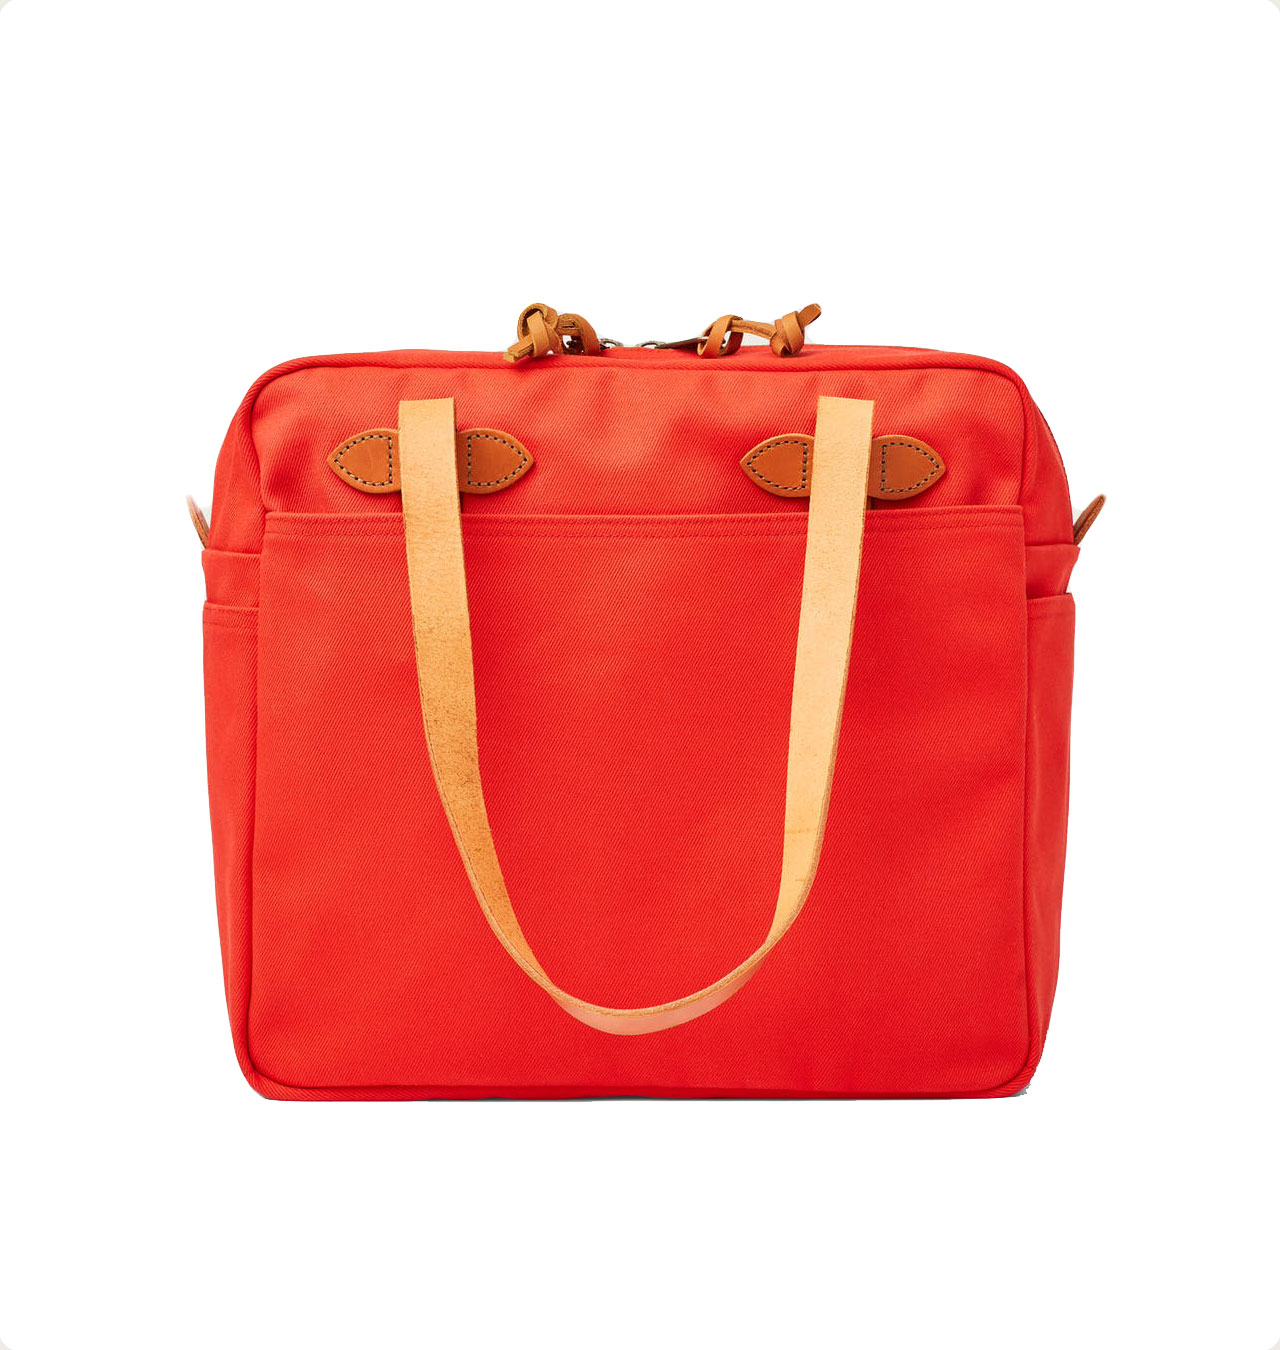 Filson - Tote Bag With Zipper - Mackinaw Red LIMITED EDITION